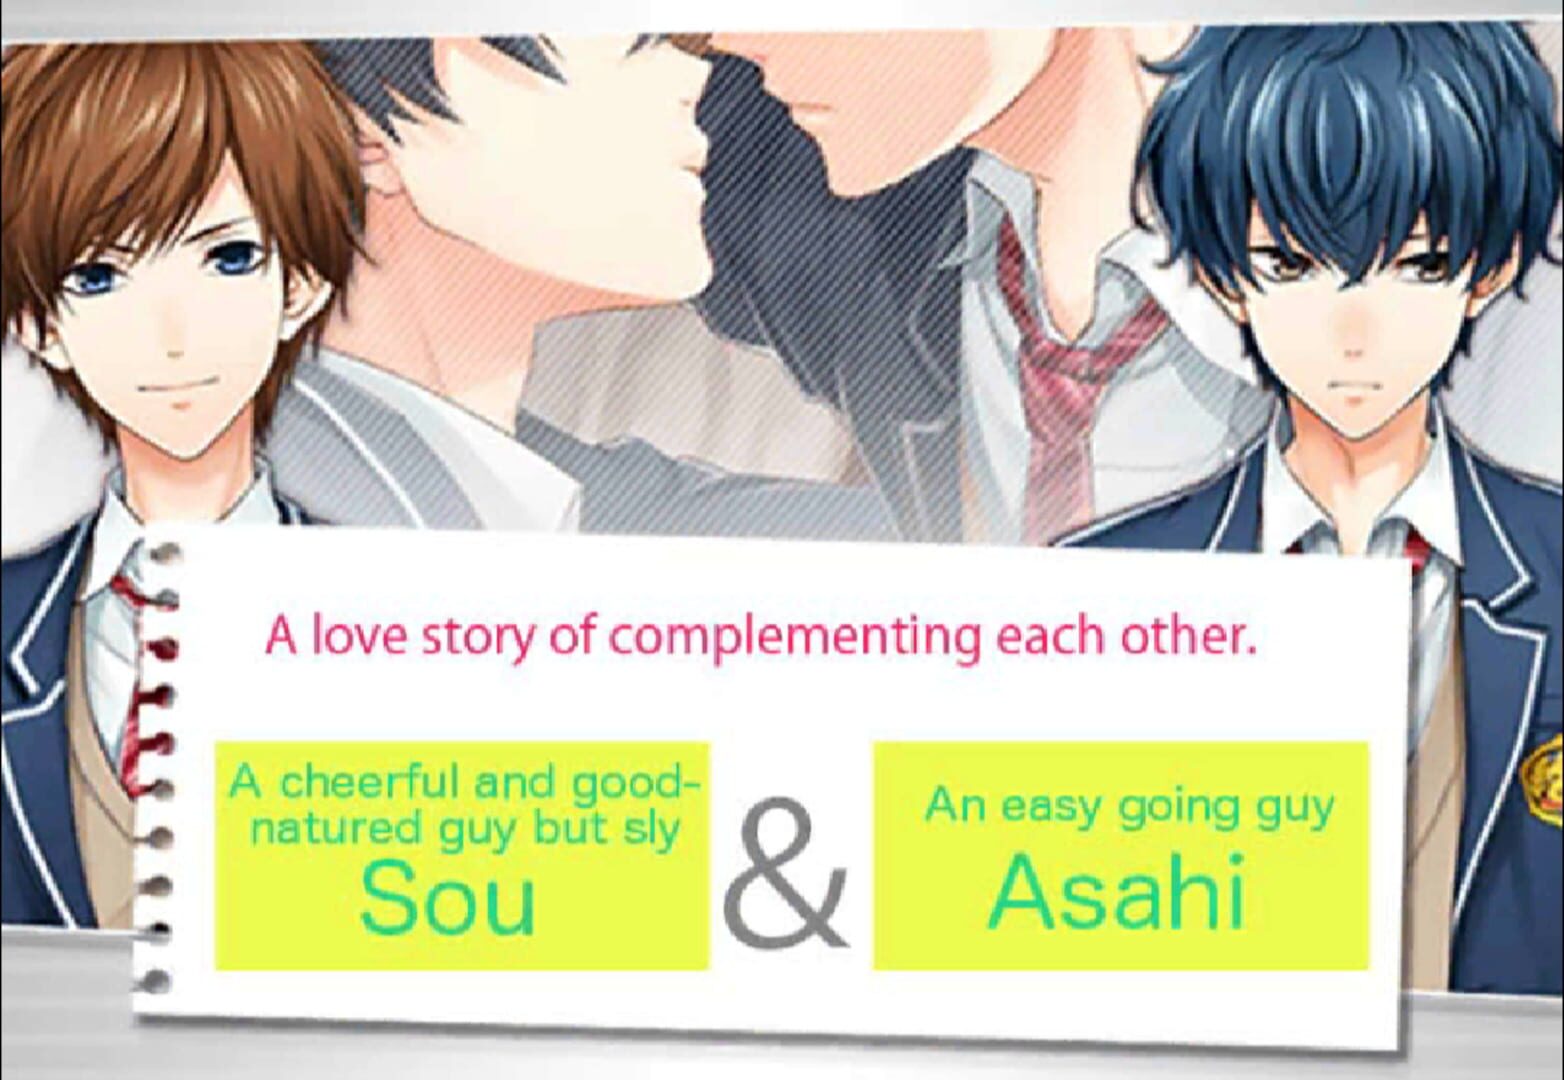 This love story. First Love story Yaoi со и Асахи. First Love story Otome. First Love story Читосе и Асахи. Новелла first Love story.